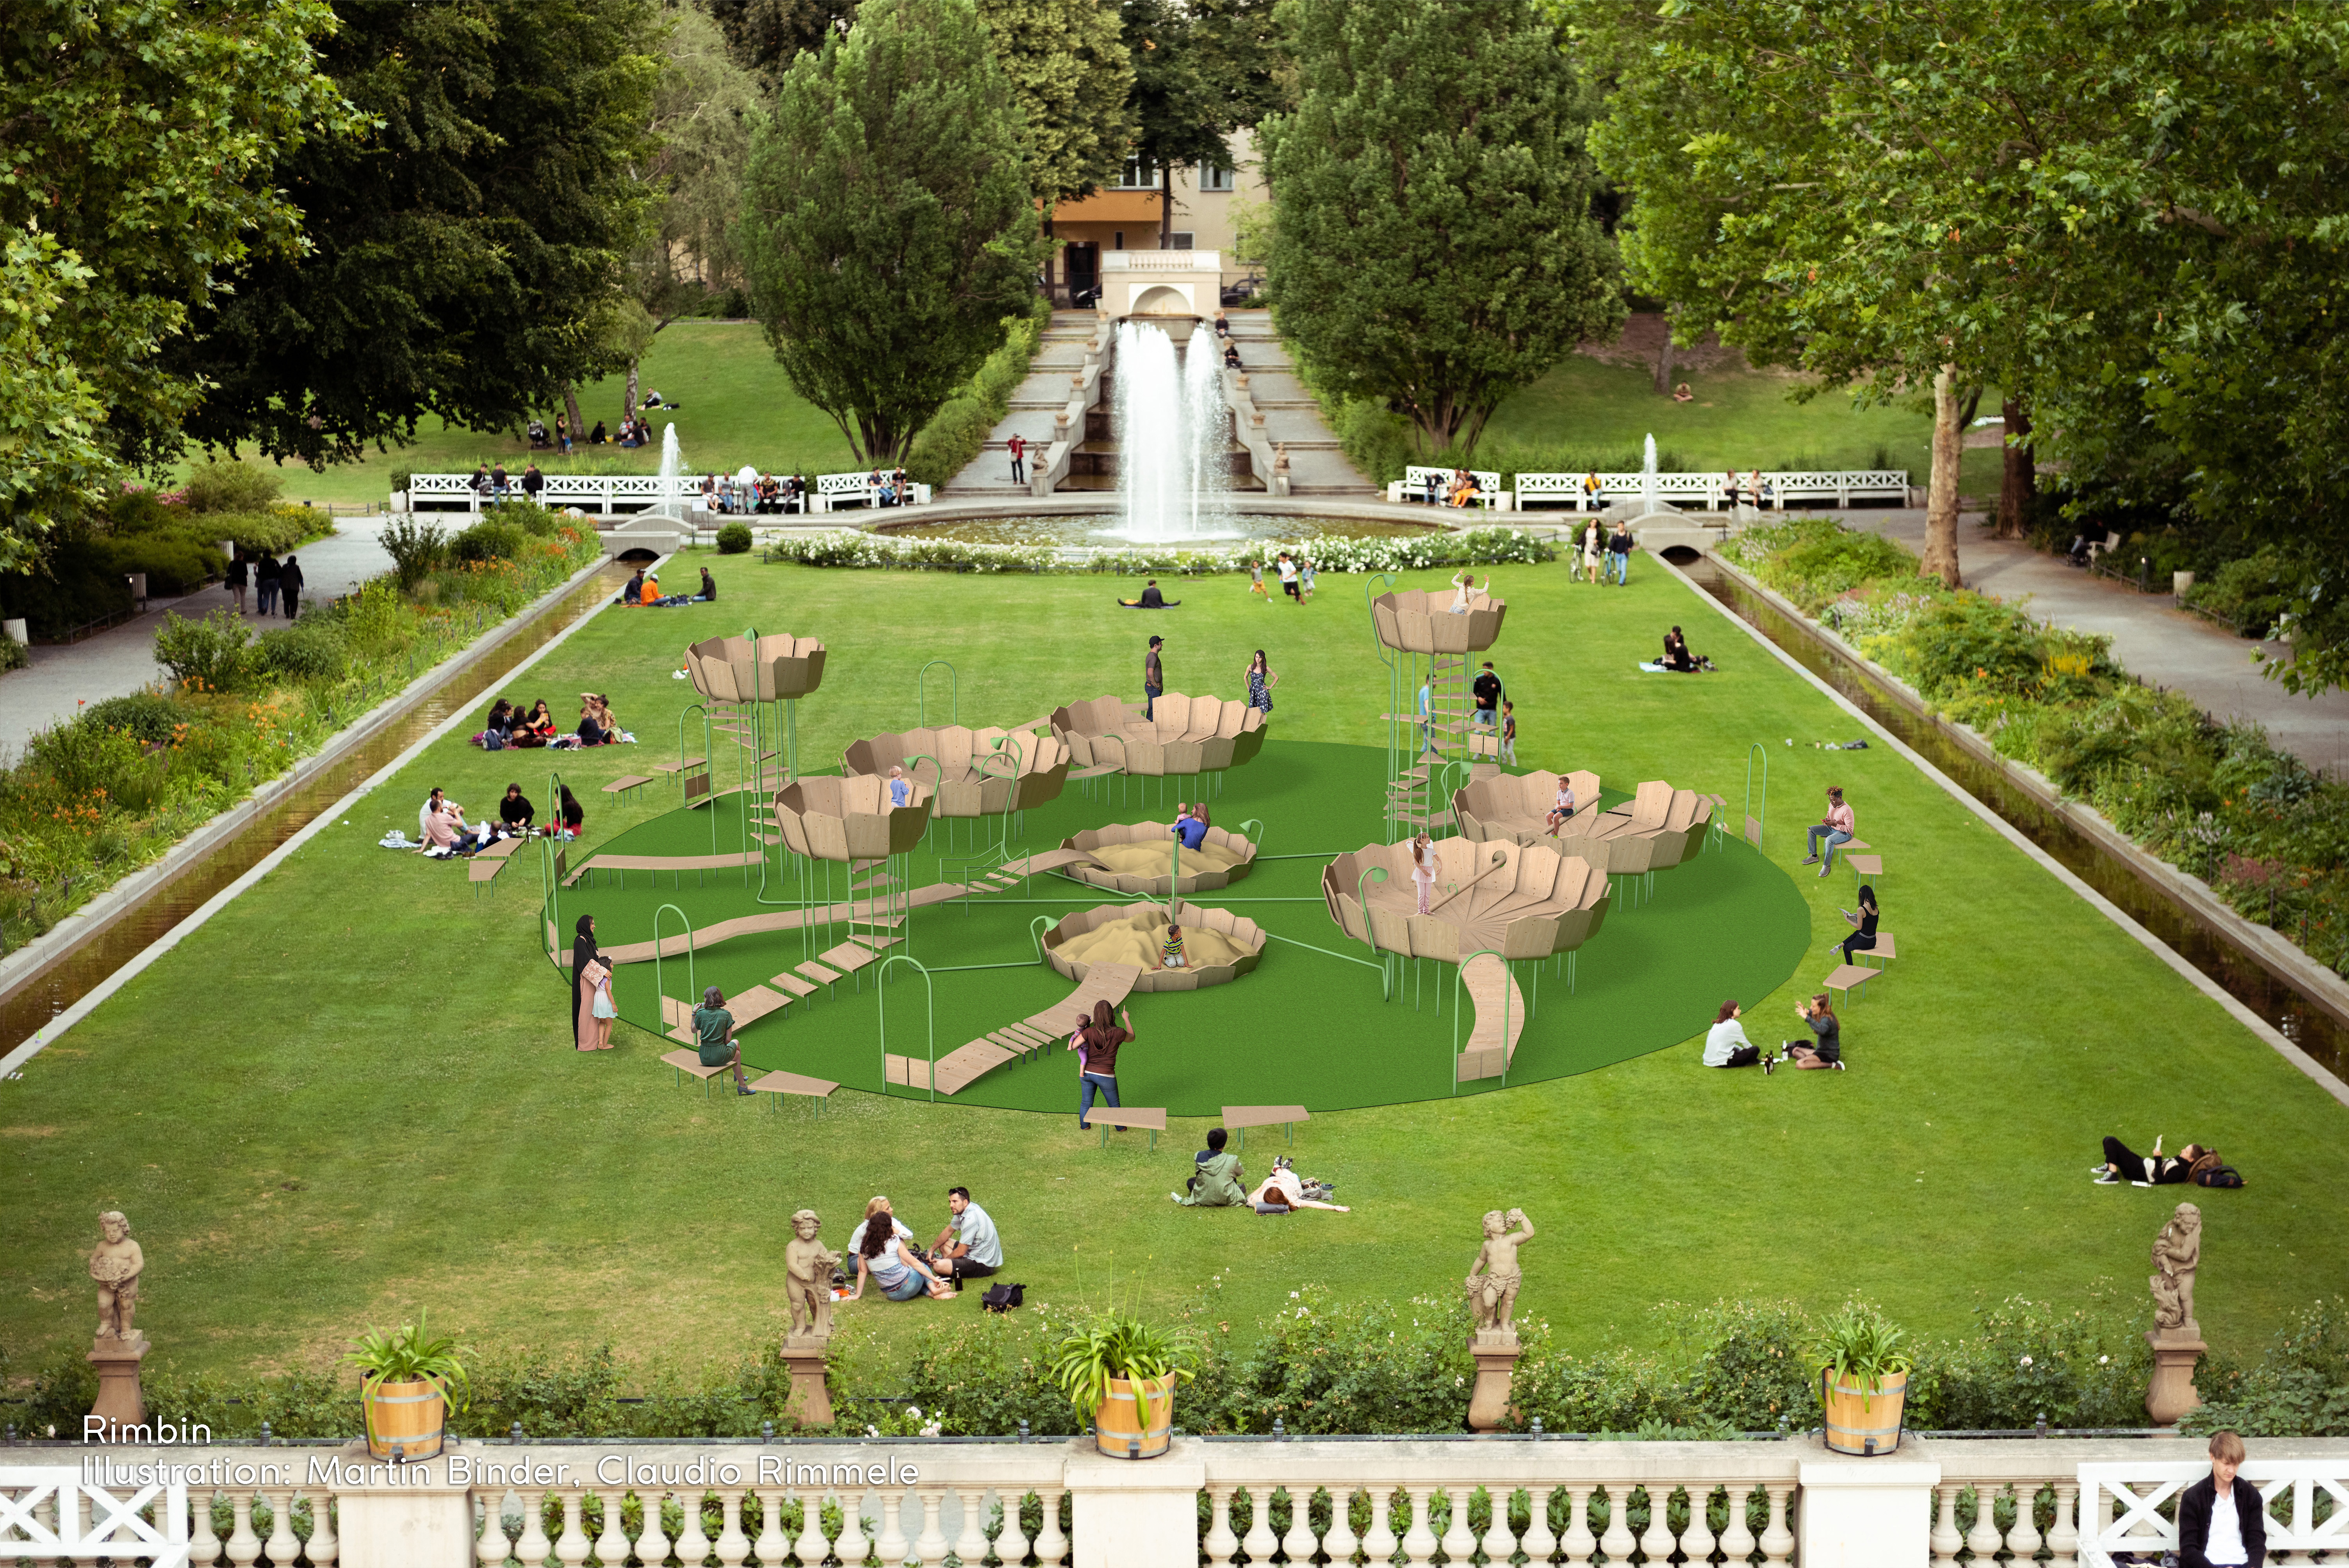 Rimbin: An Infection-free Playground Inspired by Nature